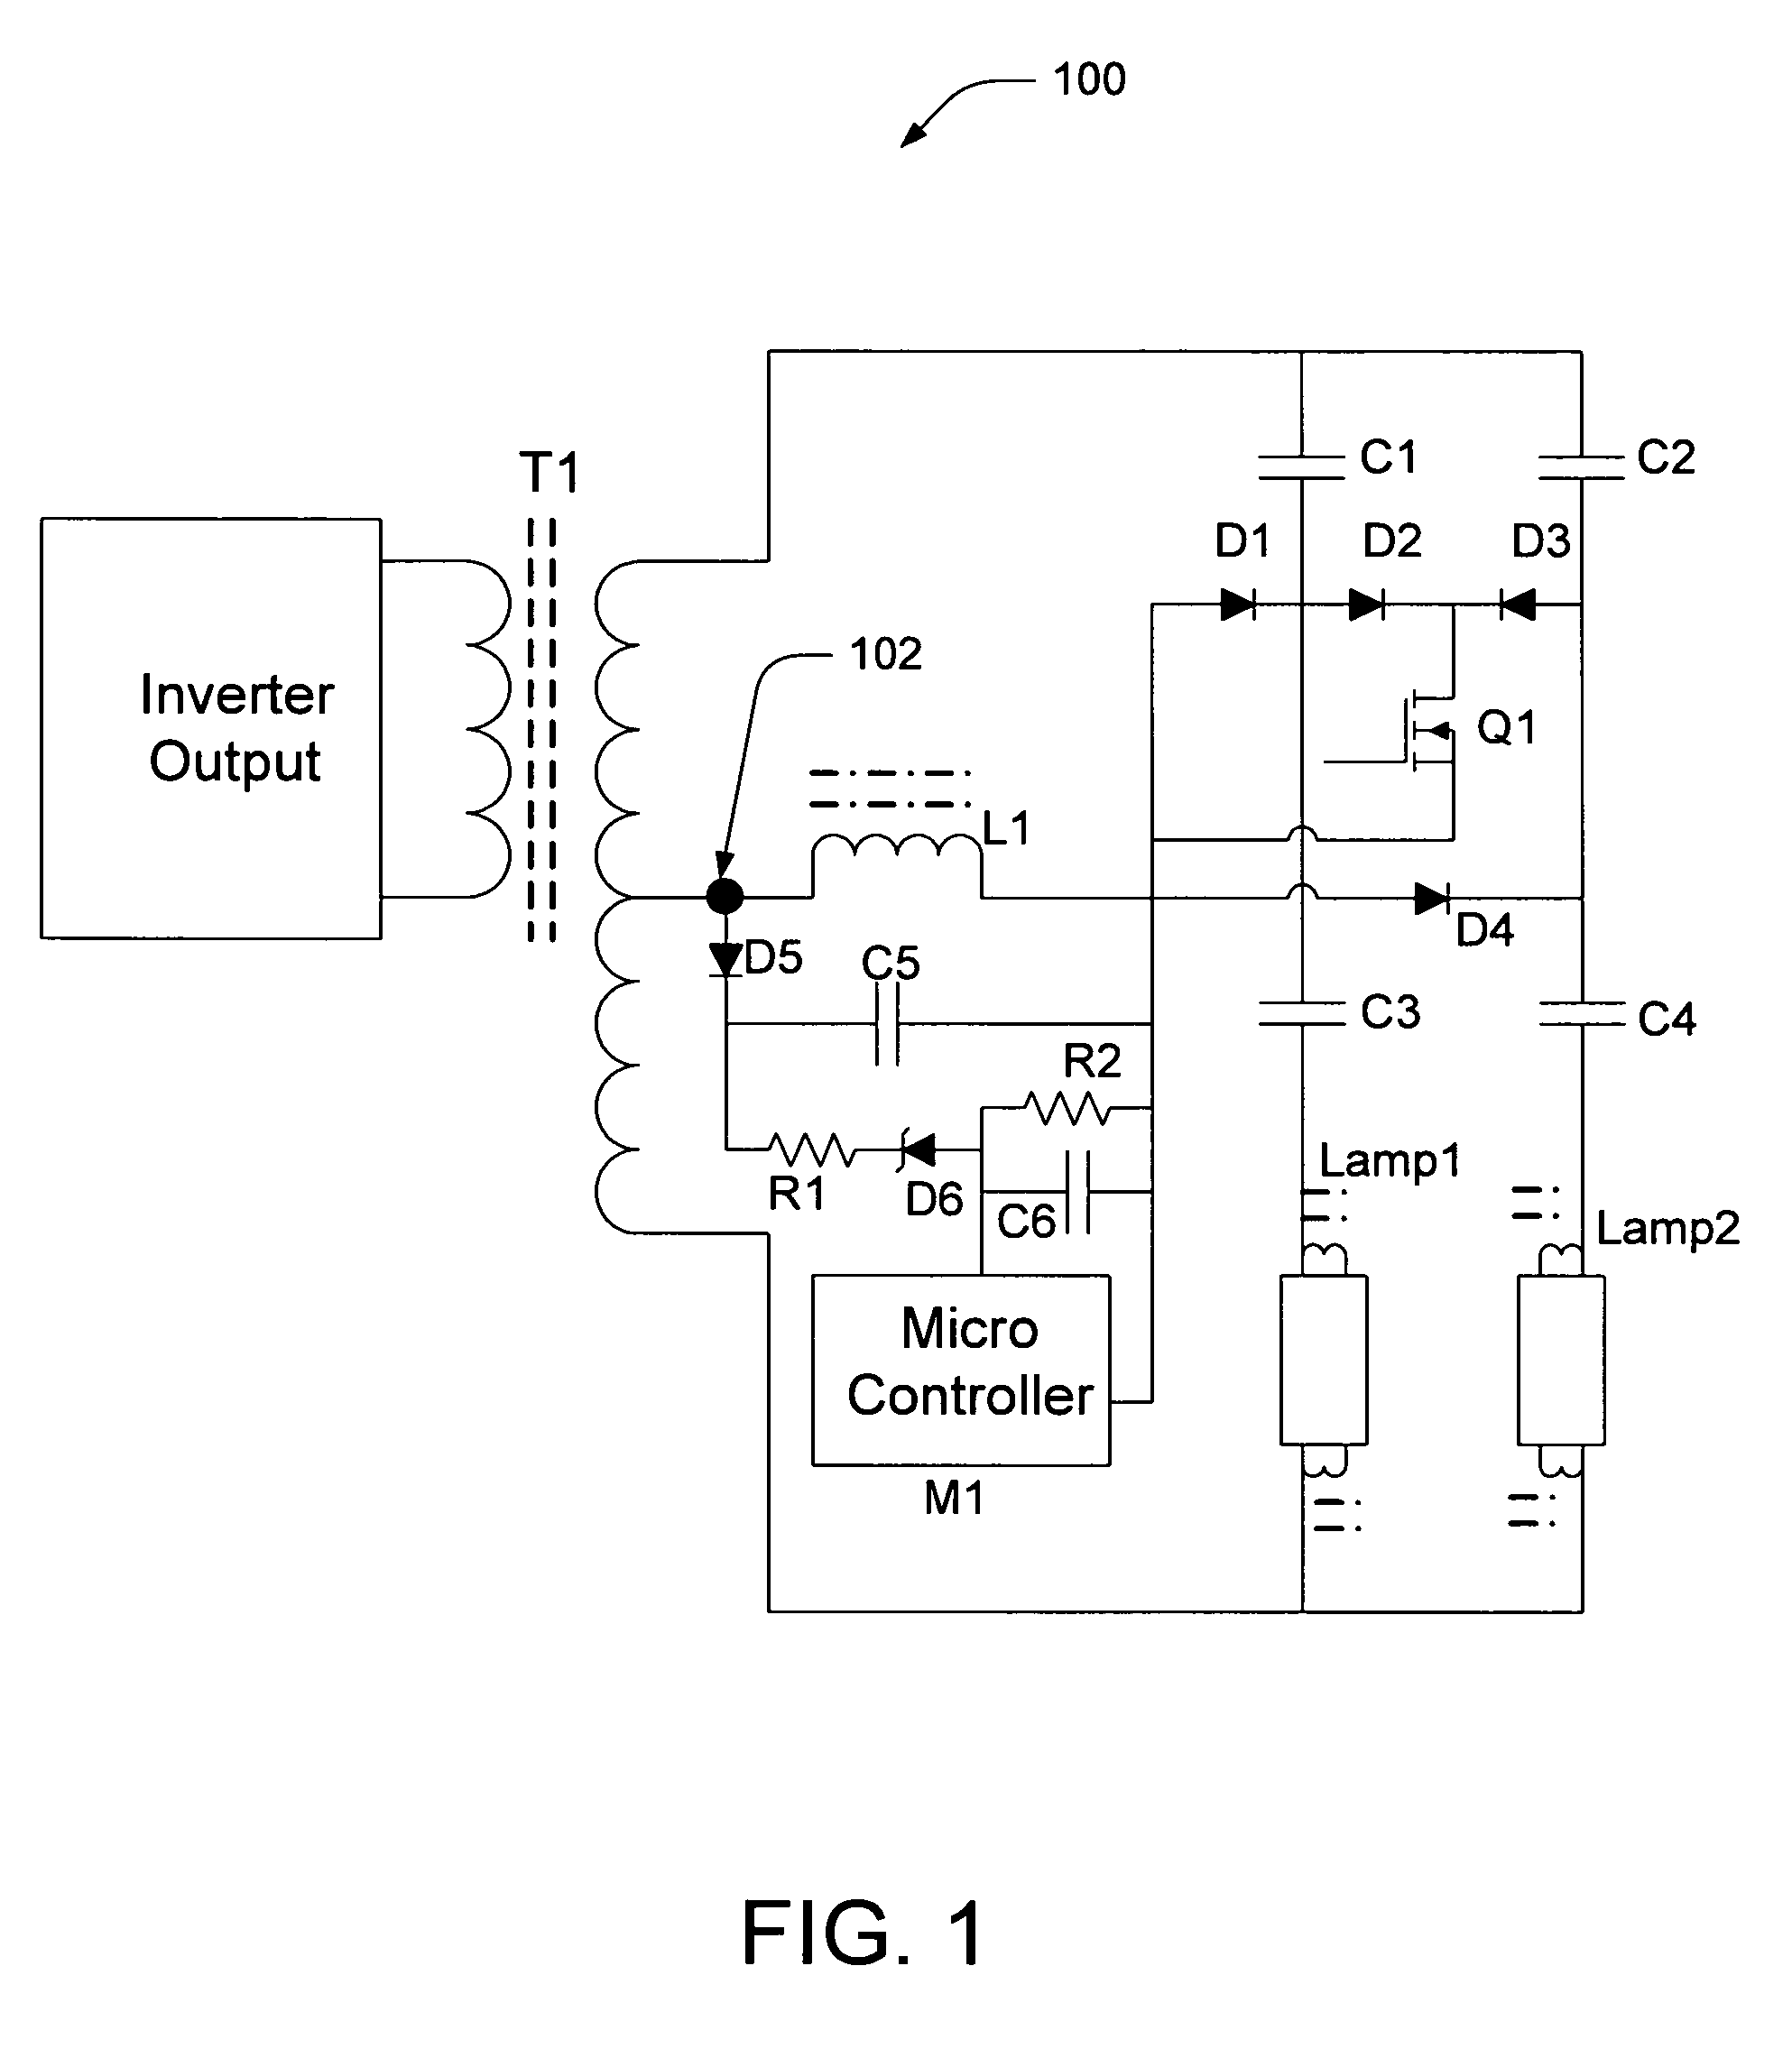 Single point sensing for end of lamp life, anti-arcing, and no-load protection for electronic ballast